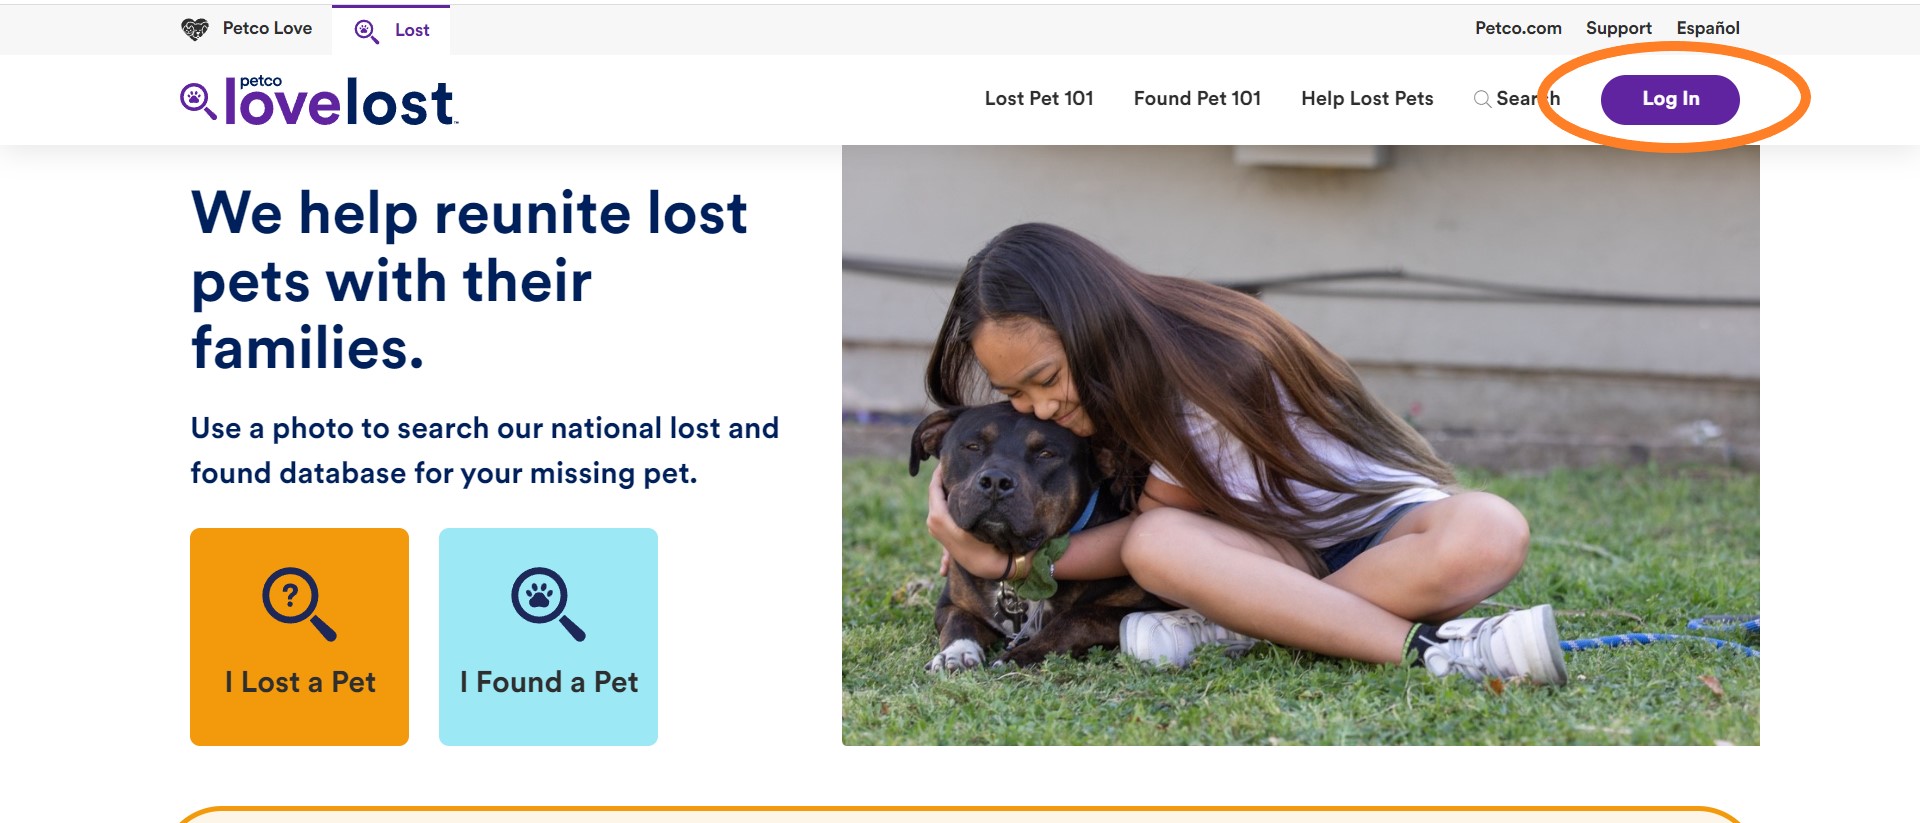 How do I report a found pet? – Petco Love Lost